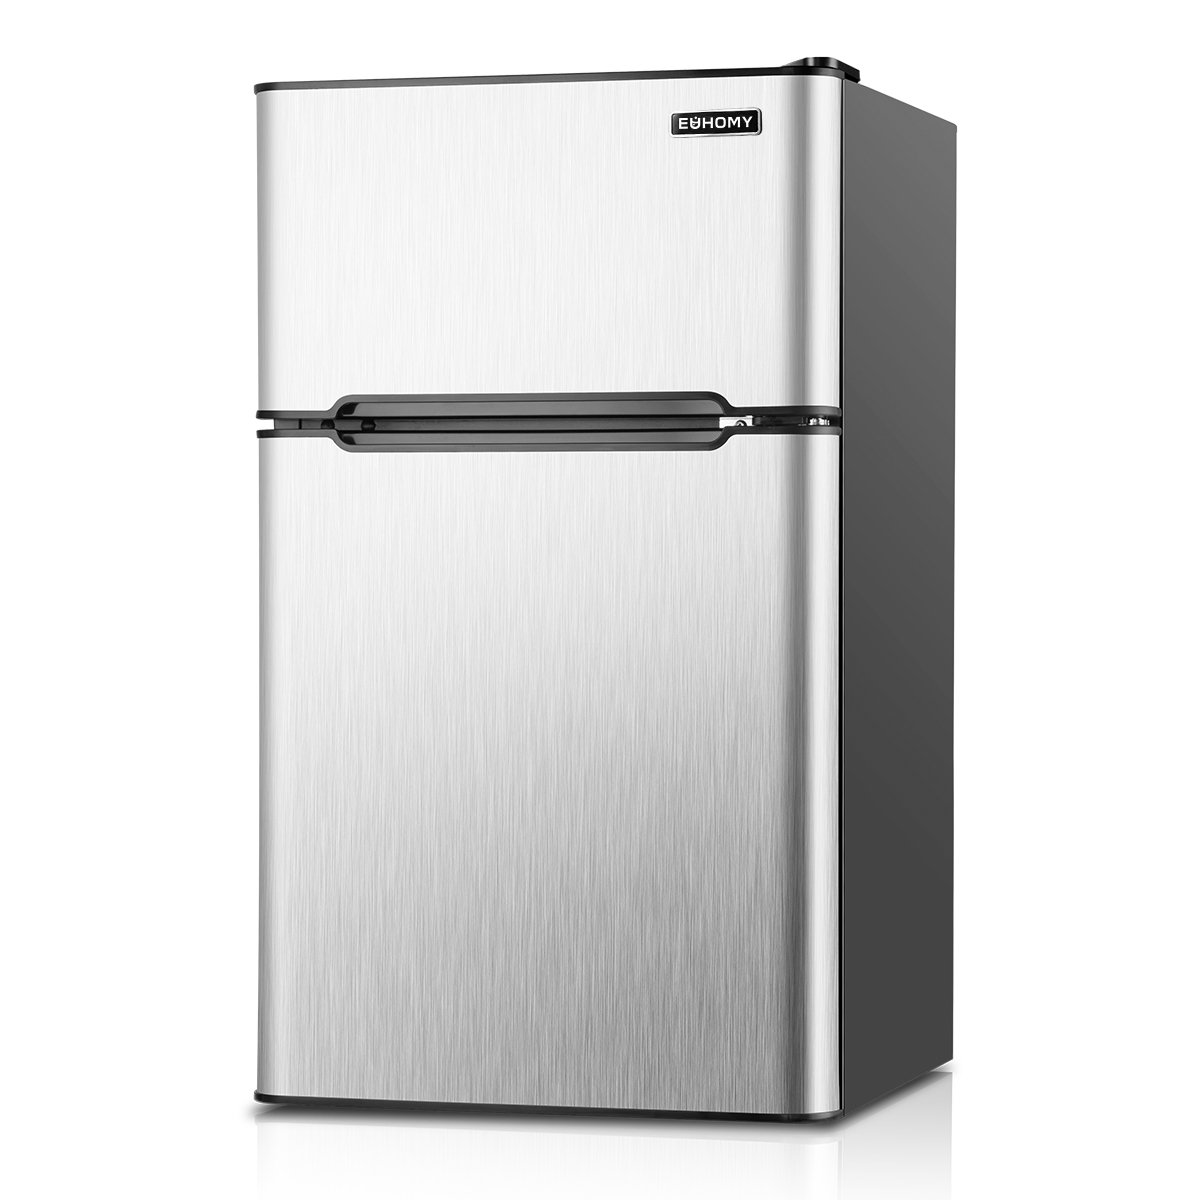  EUHOMY Mini Freezer Countertop, 1.1 Cubic Feet, Single Door  Compact Upright Freezer with Reversible Door, Removable Shelves, Small  freezer for Home/Dorms/Apartment/Office(Black) : Appliances